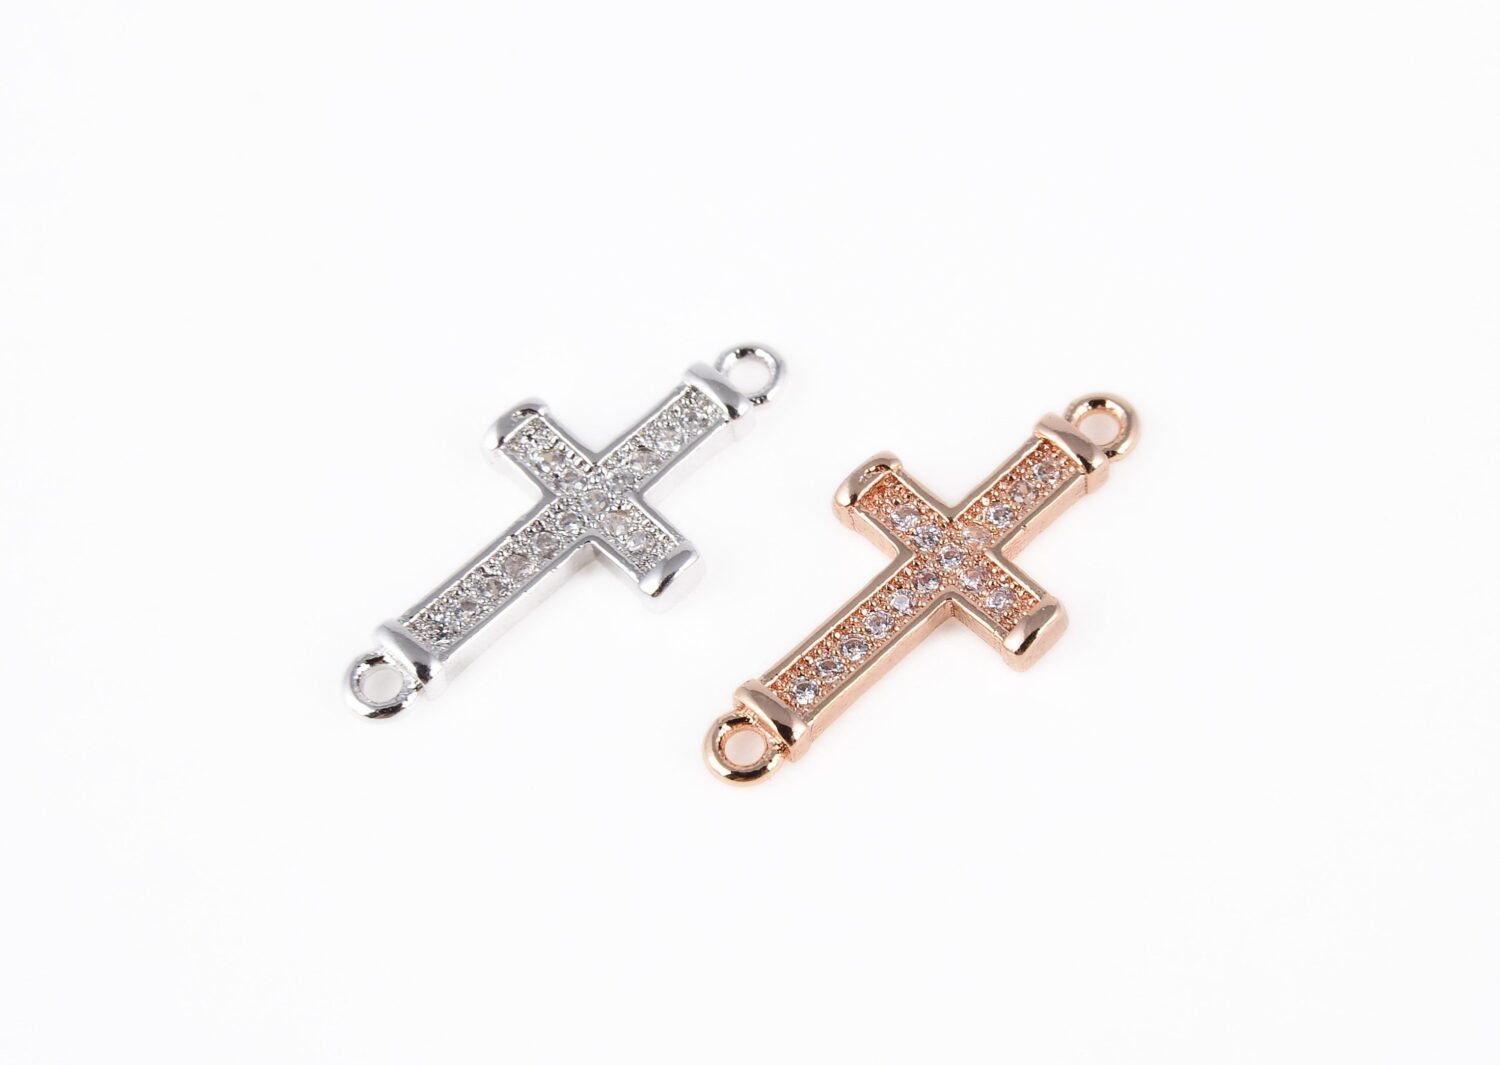 10pcs Paved Micro CZ Cross Charms for Jewelry Making 